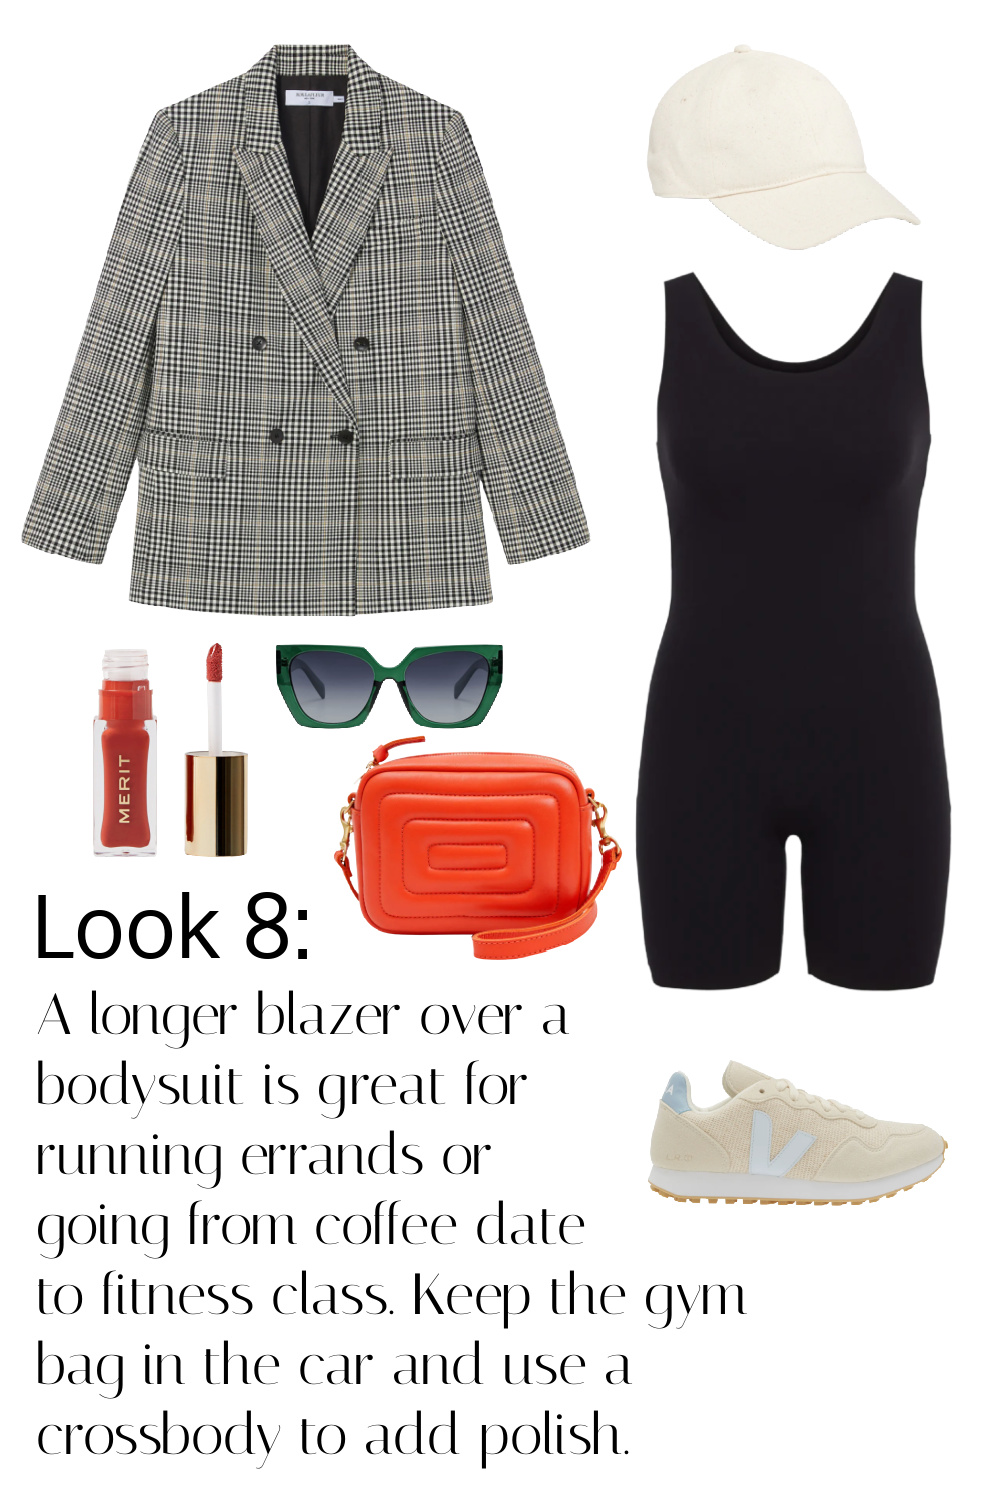 The same blazer styled over a bodyshort with sneakers, a cream canvas baseball cap, and orange leather crossbody bag. A longer blazer over a bodysuit is great for running errands or going from coffee date to fitness class. Keep the gym bag in the car and use a crossbody to add polish.